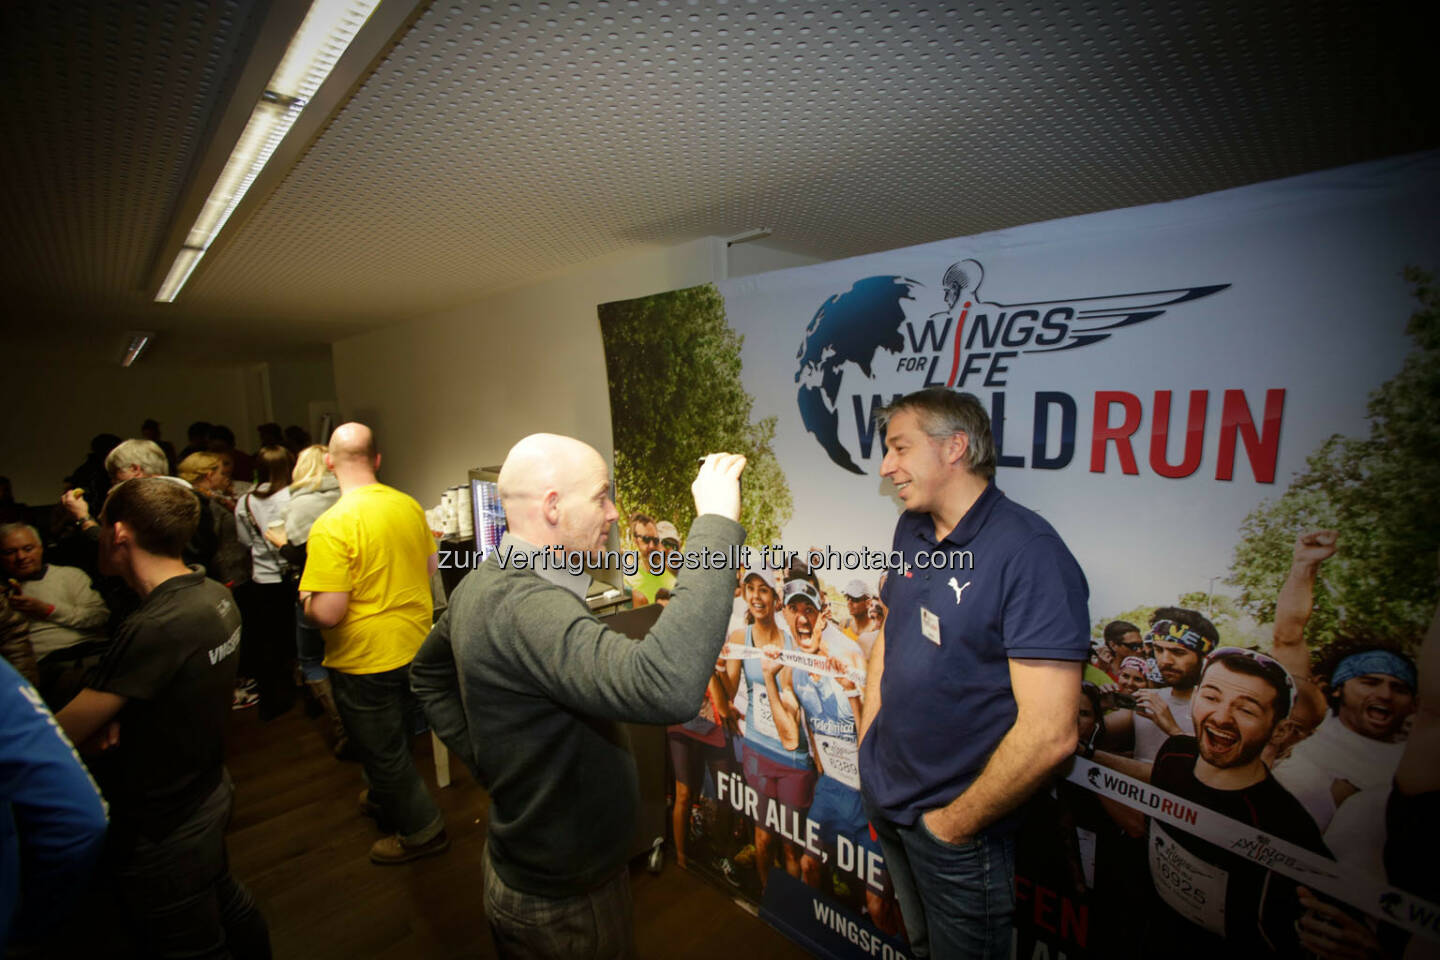 Thomas Smogawetz talking to participants at the Wings for Life World Run event in Munich 23rd of January 2016 (Bild: Daniel Grund)